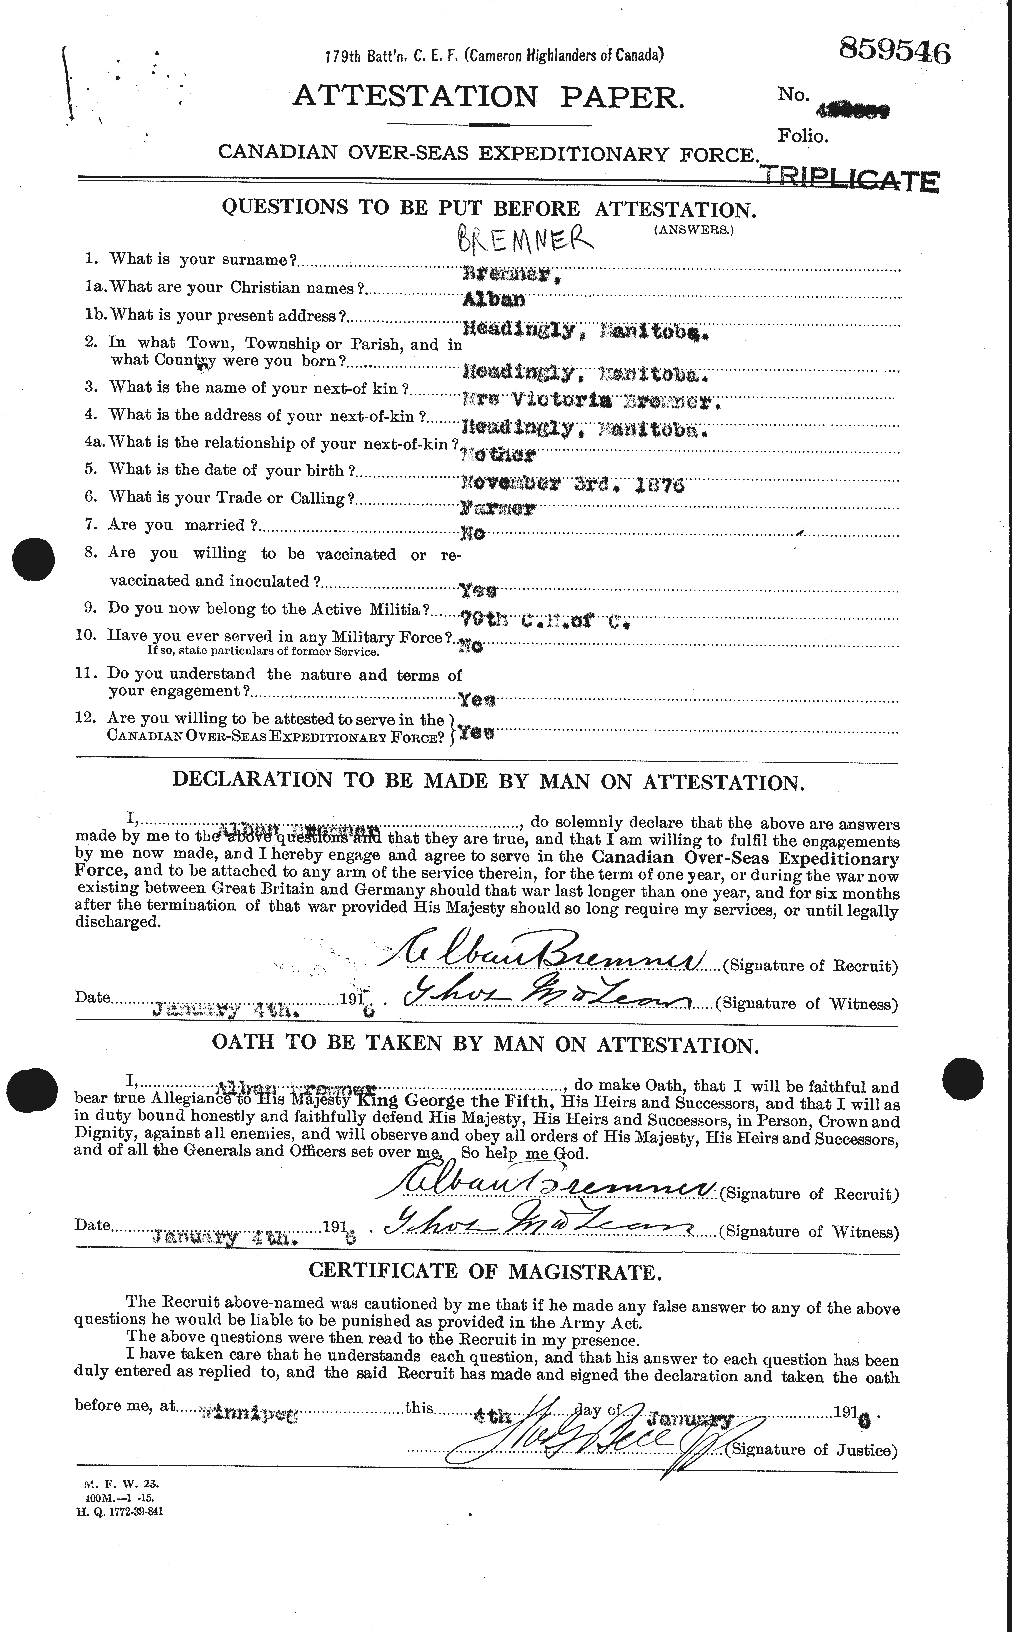 Personnel Records of the First World War - CEF 263655a